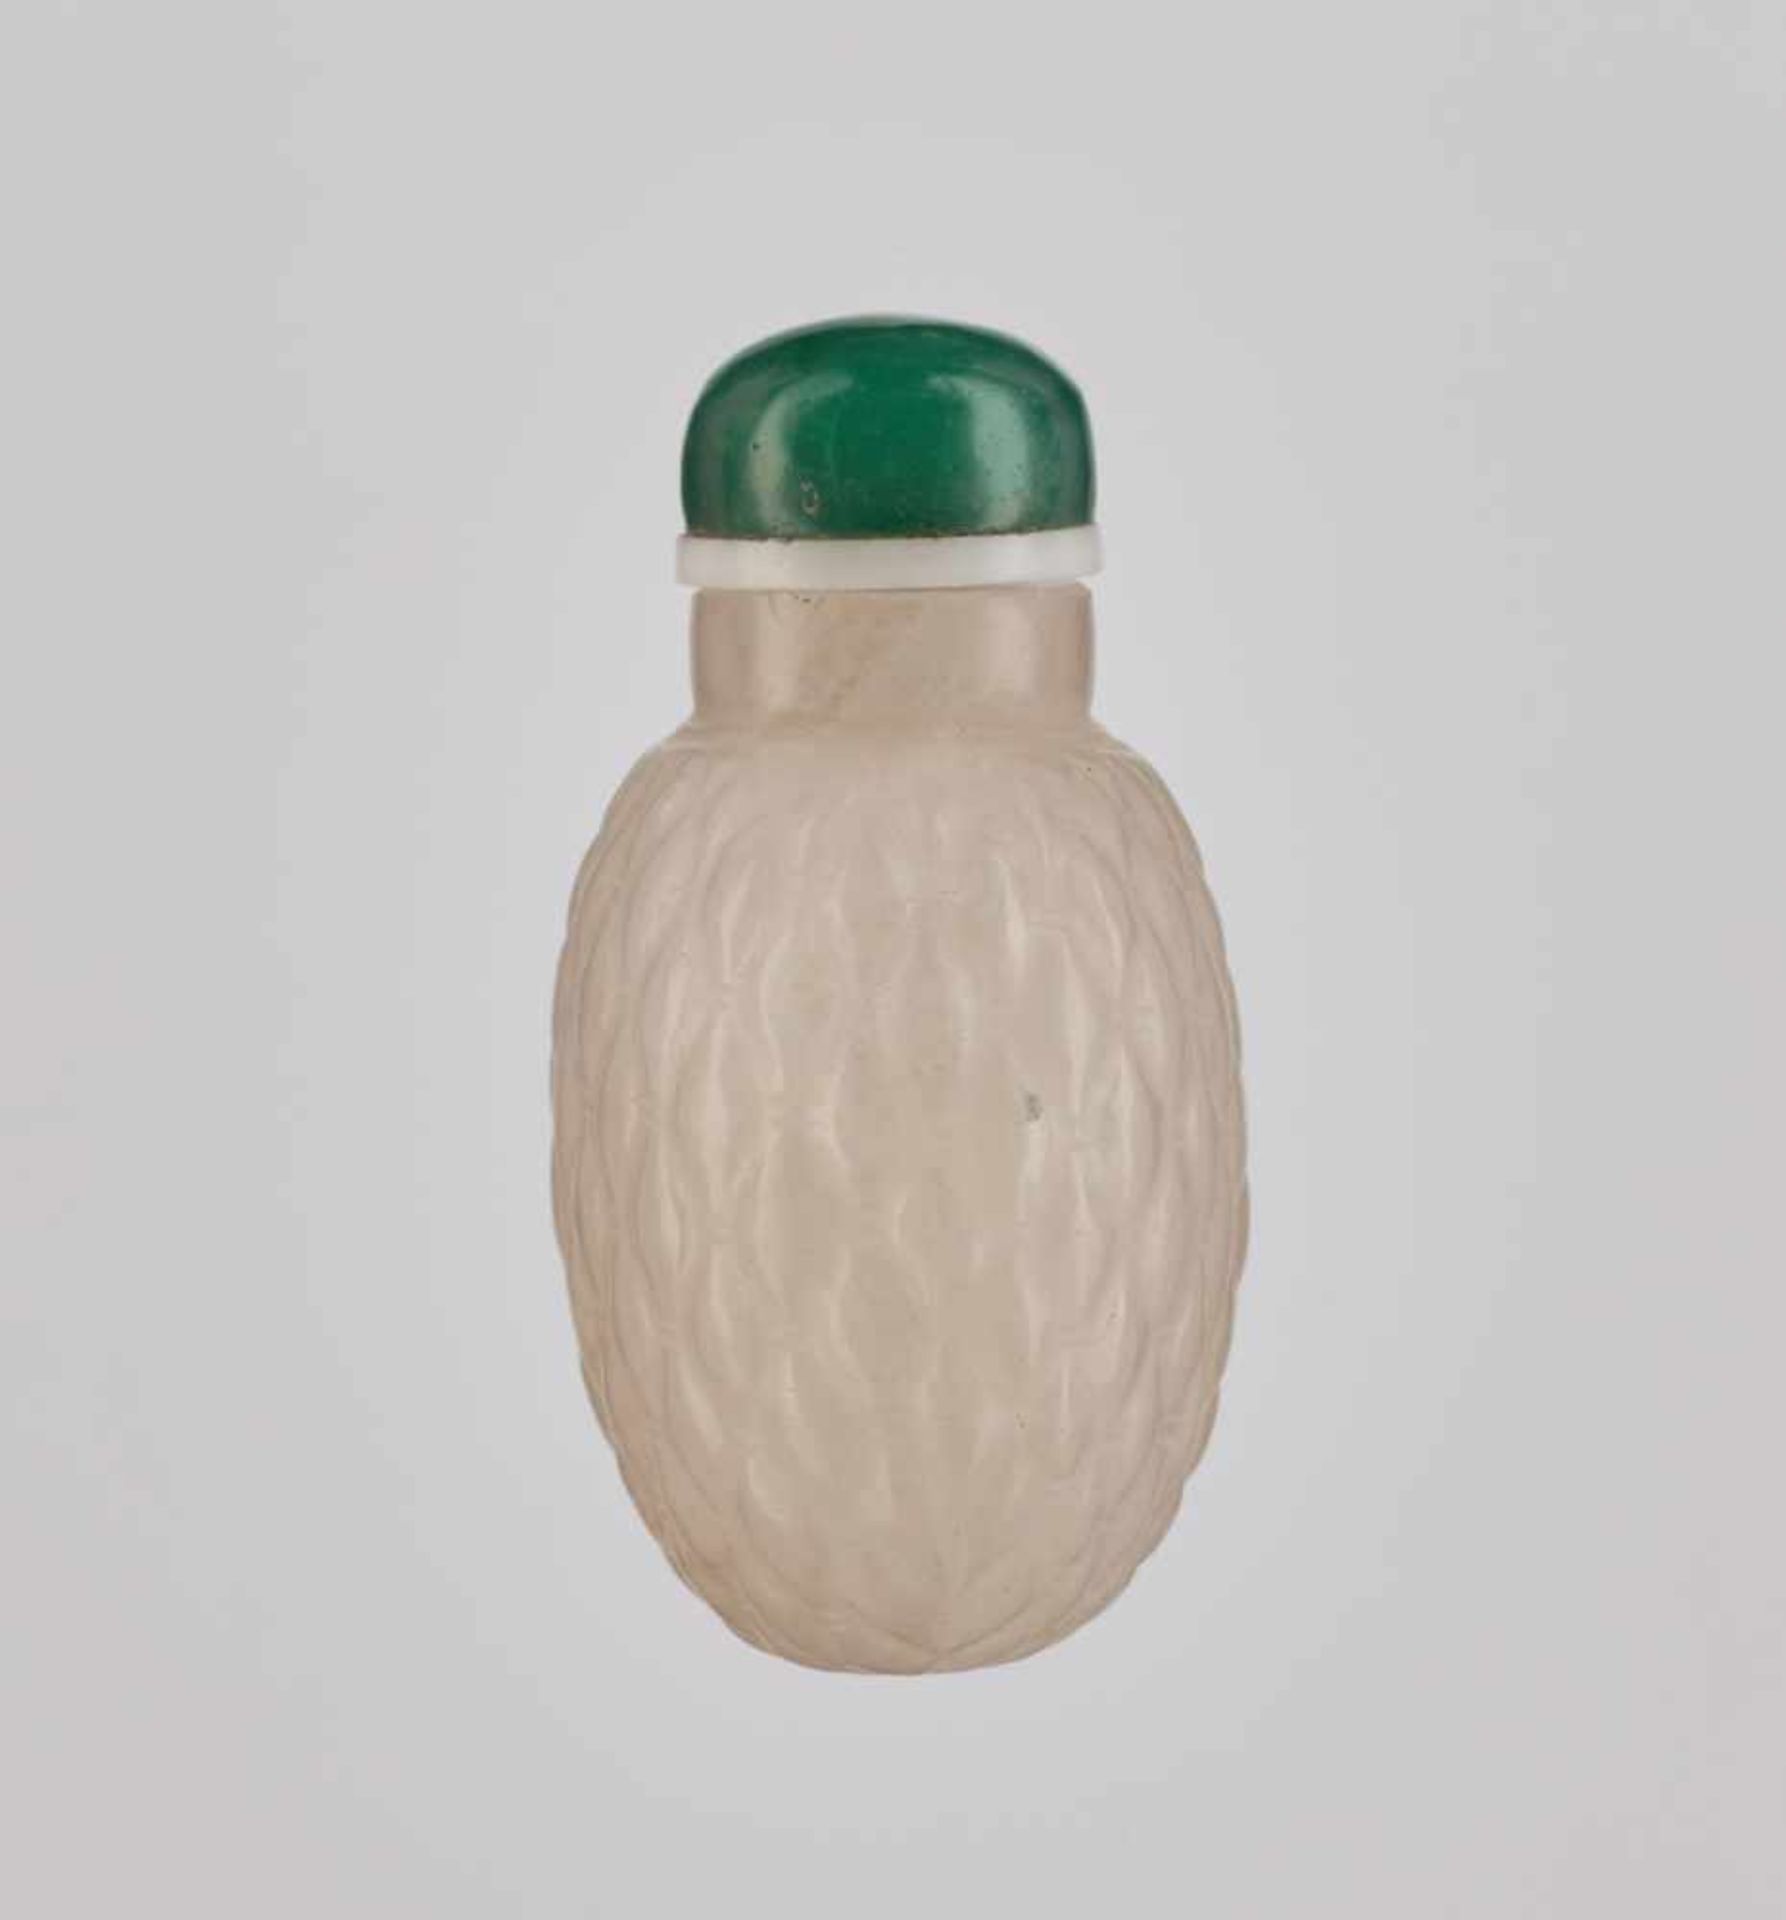 A CARVED CRYSTAL 'BASKETWEAVE' SNUFF BOTTLE, QING DYNASTY Translucent rock crystal, with several - Image 4 of 6